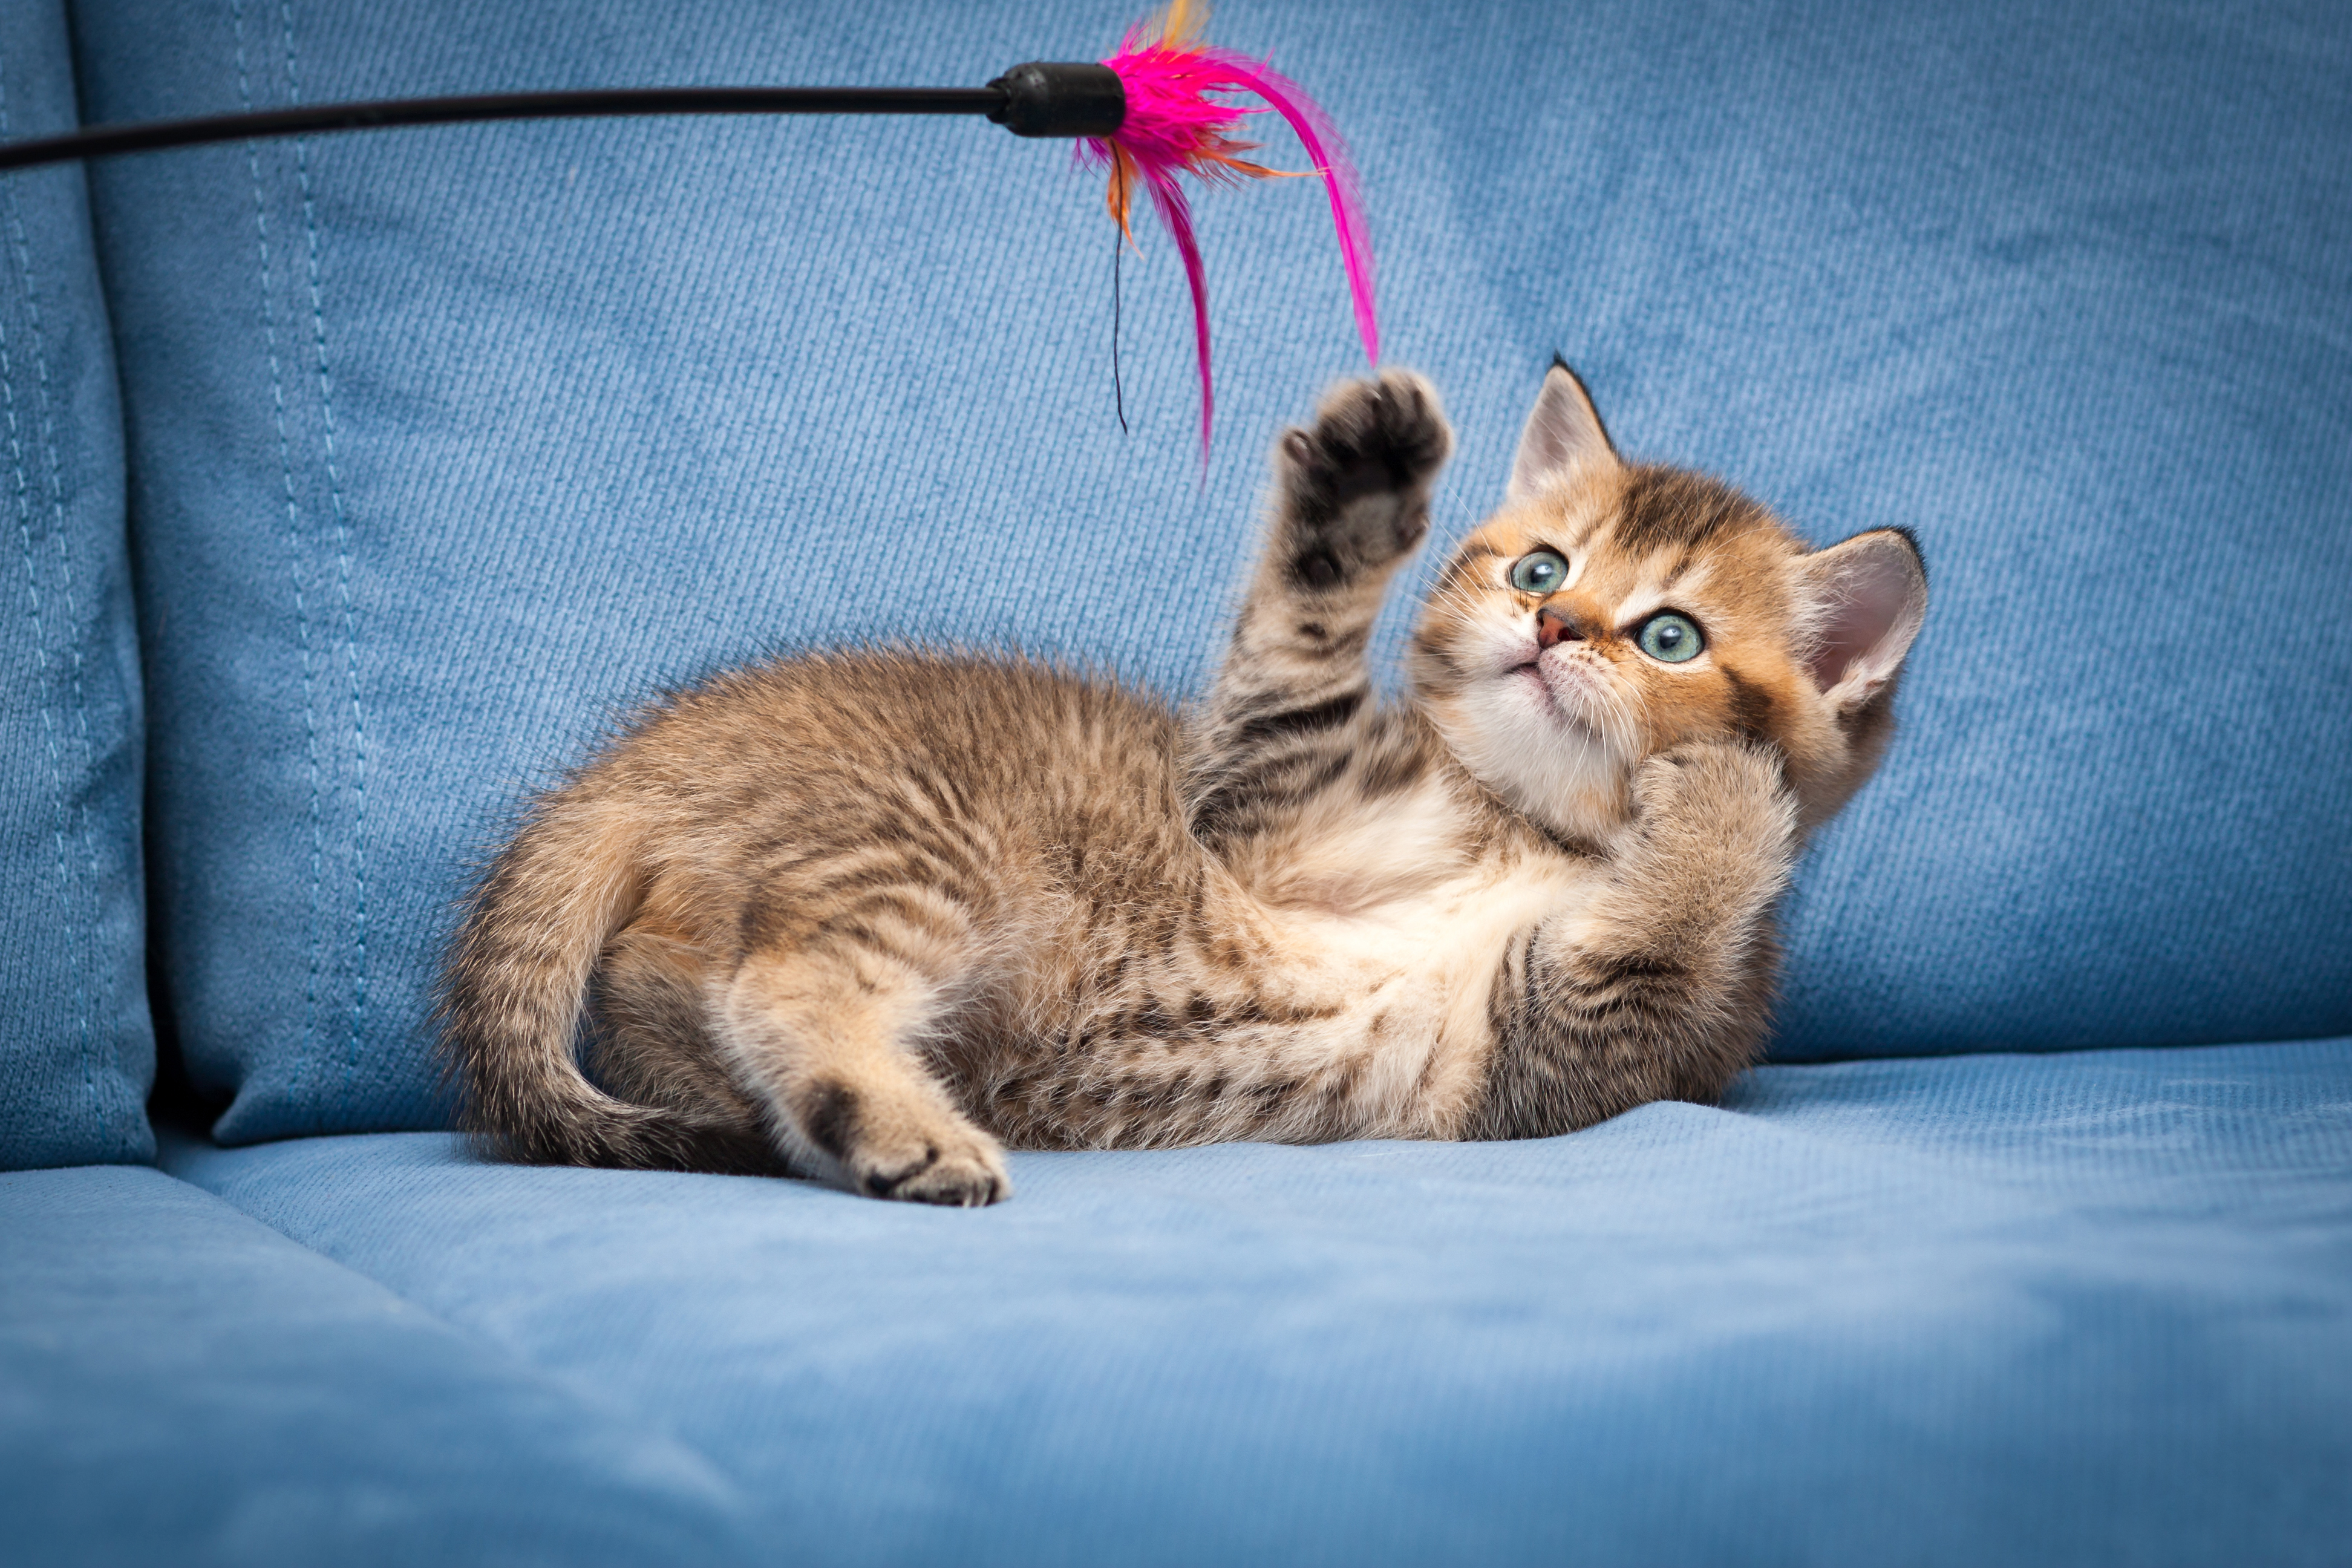 Fun Ways To Provide Mental Stimulation For Your Cat - A Better Way